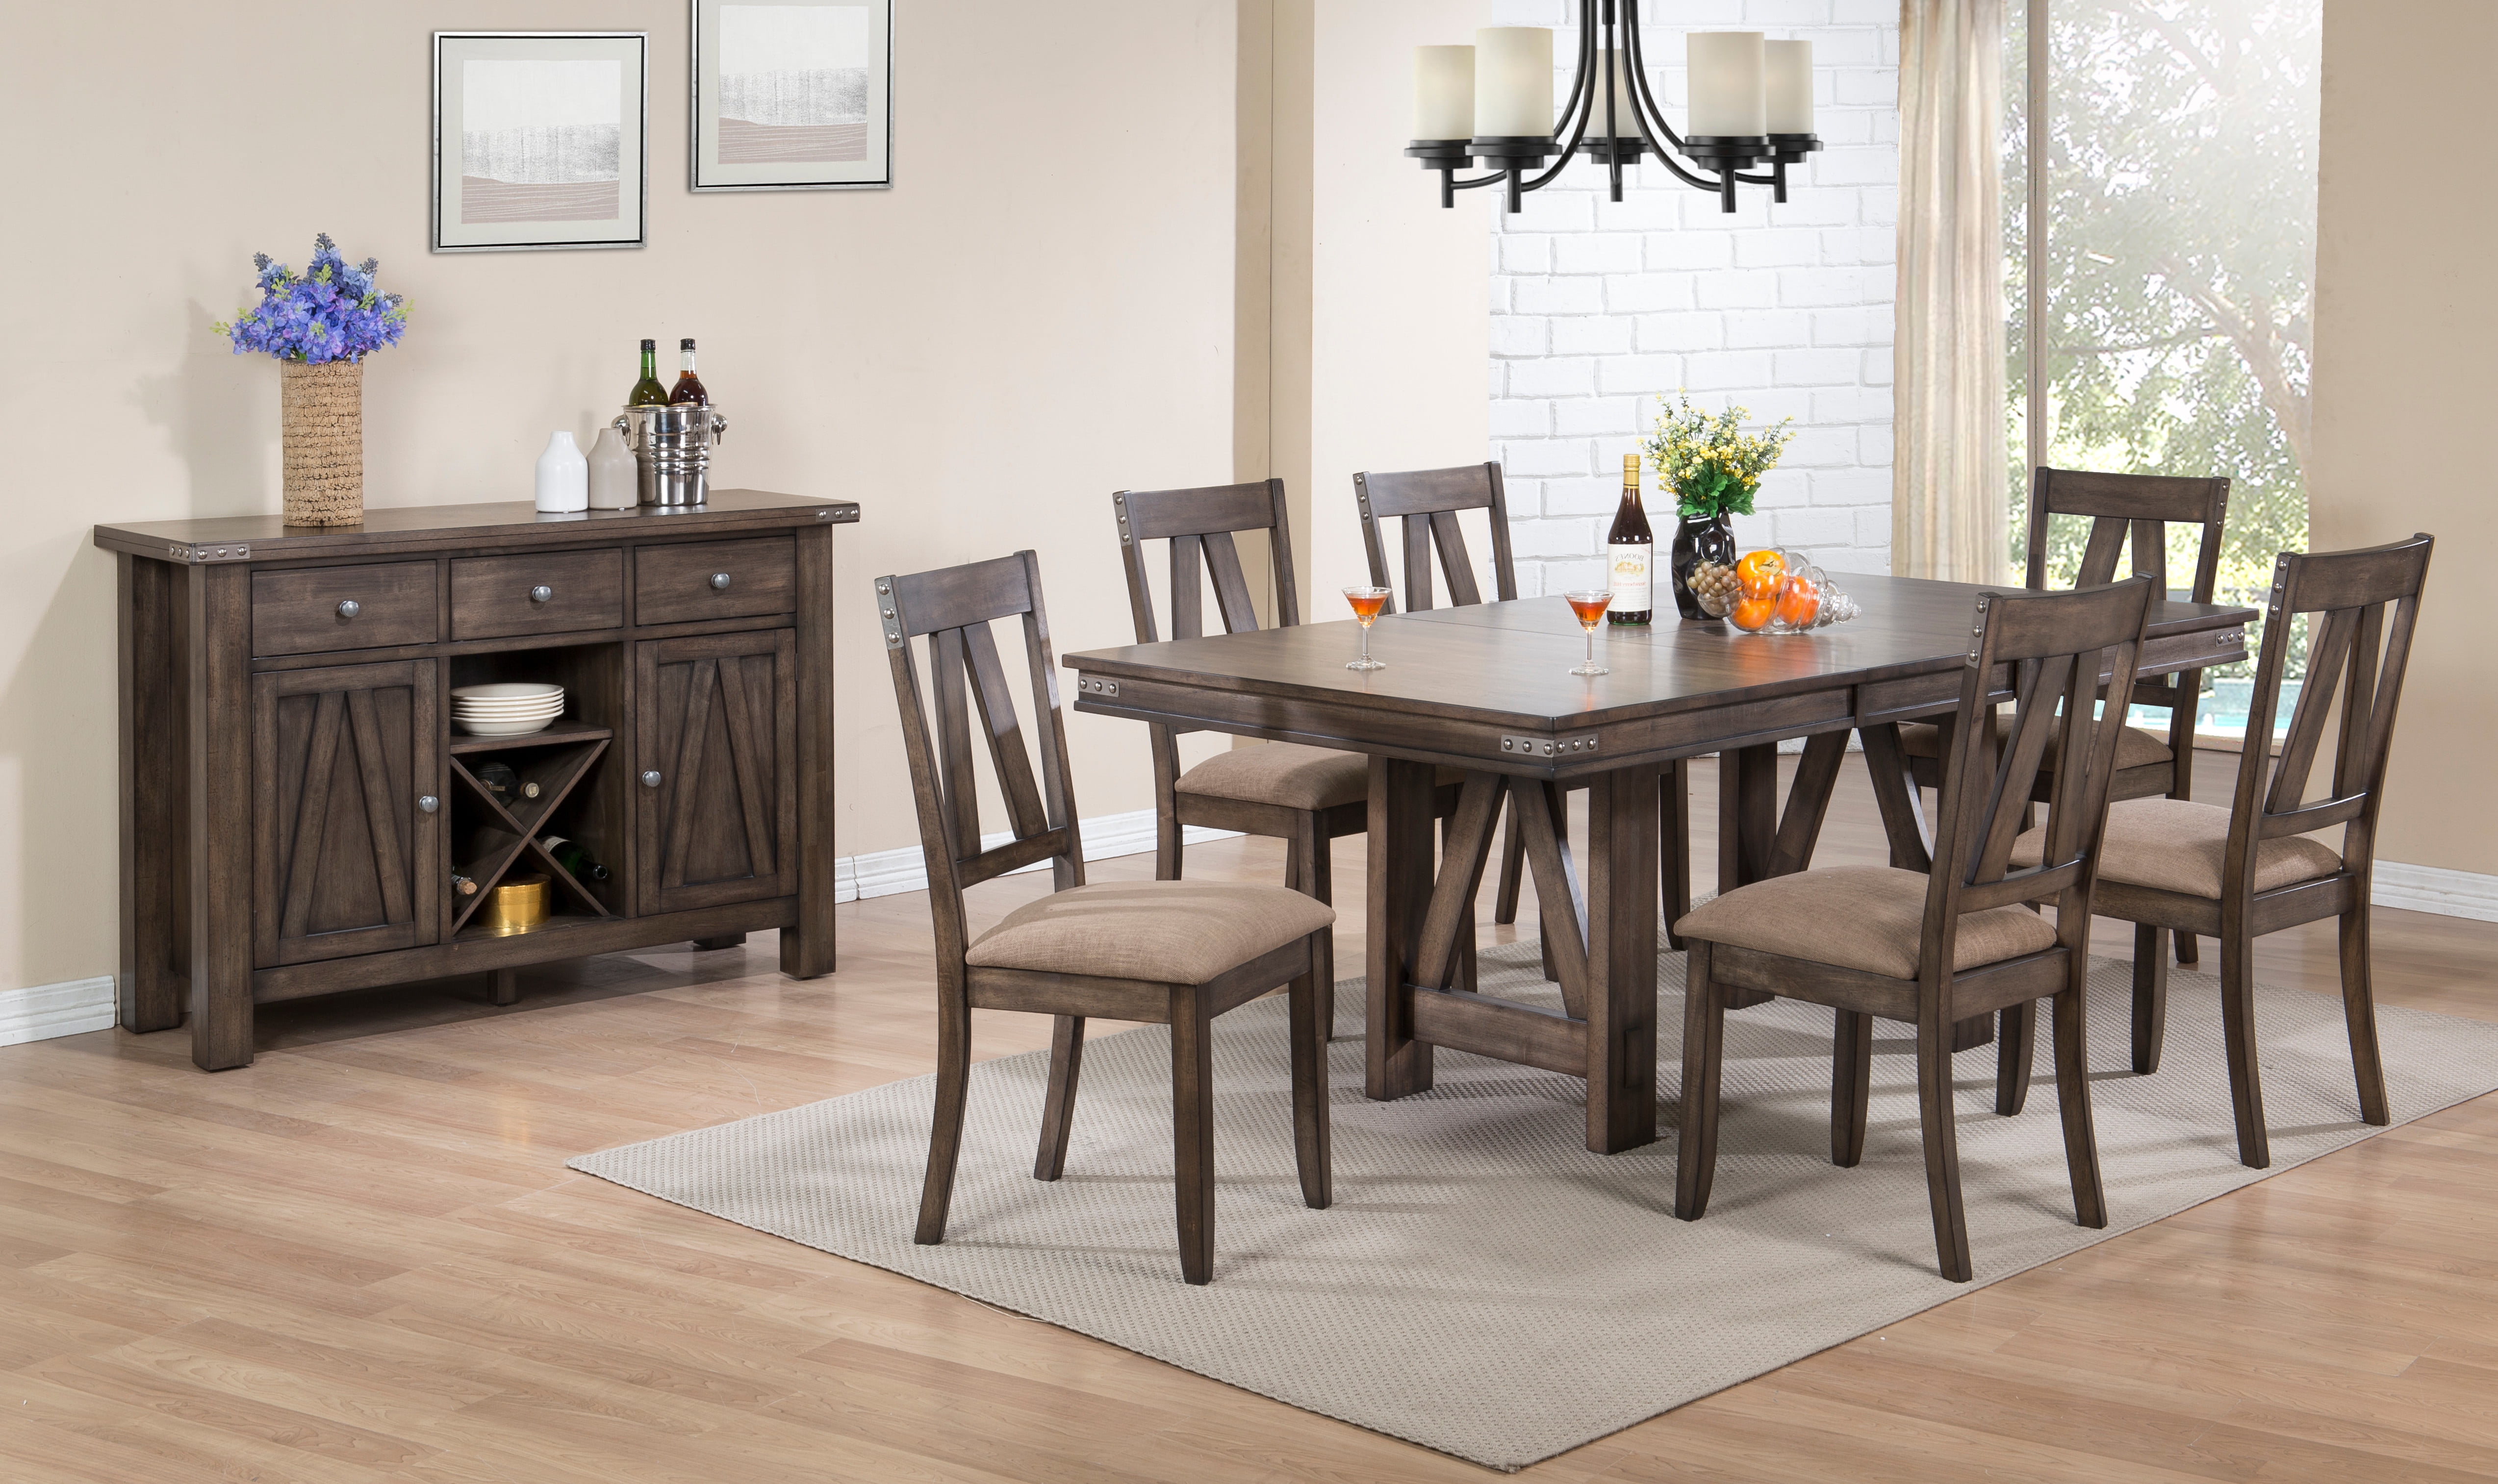 Comfortable Dining Room Table And Chairs